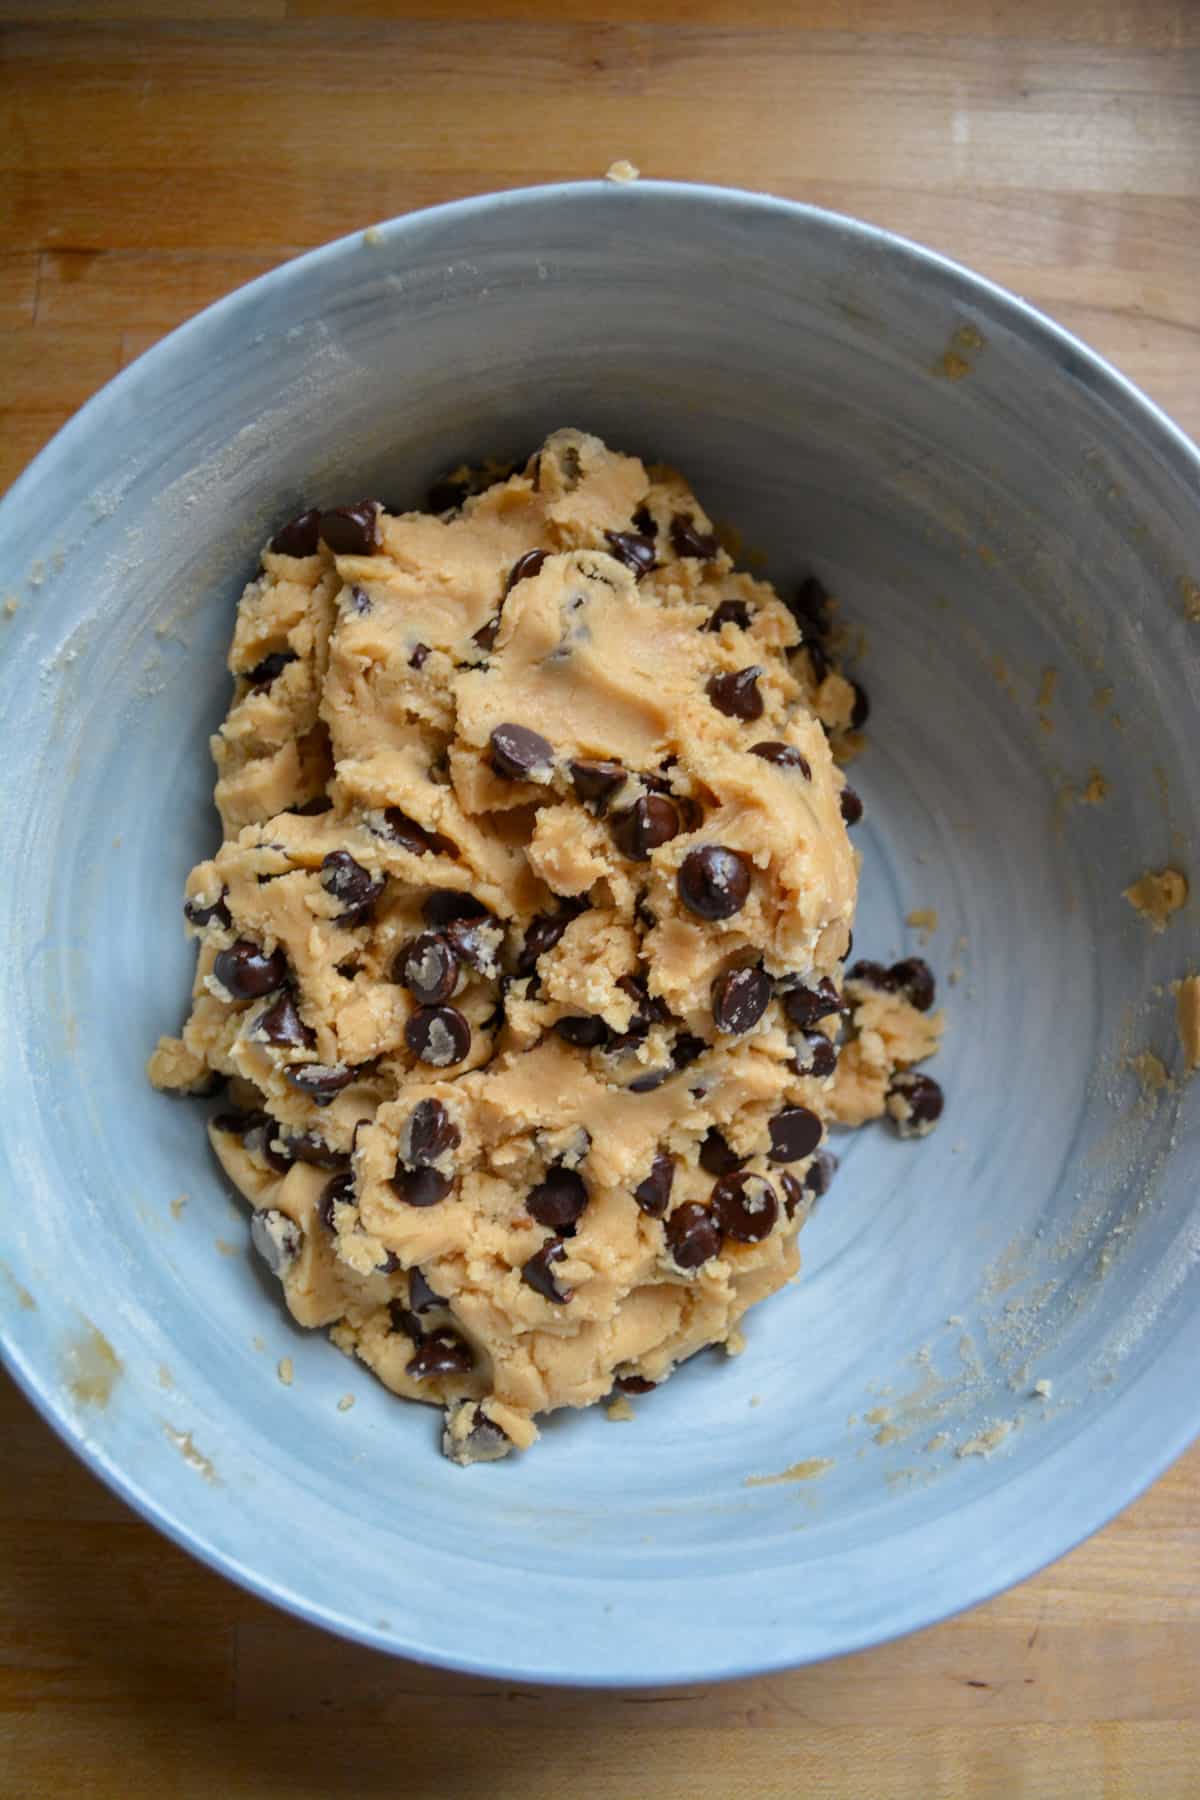 The finished coconut oil chocolate chip cookie dough in a bowl.